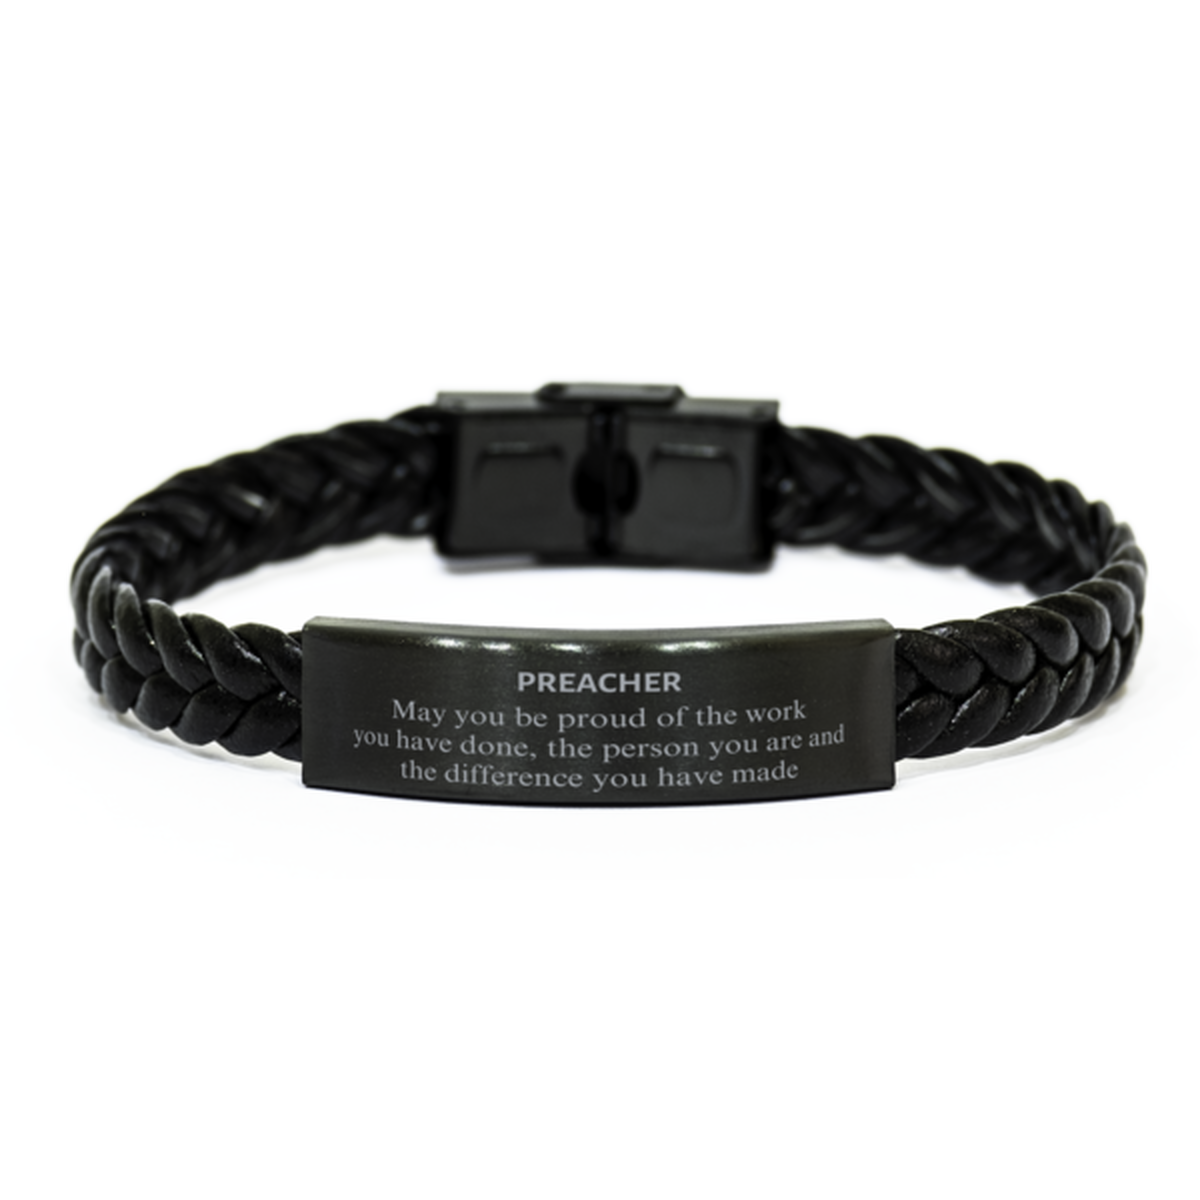 Preacher May you be proud of the work you have done, Retirement Preacher Braided Leather Bracelet for Colleague Appreciation Gifts Amazing for Preacher